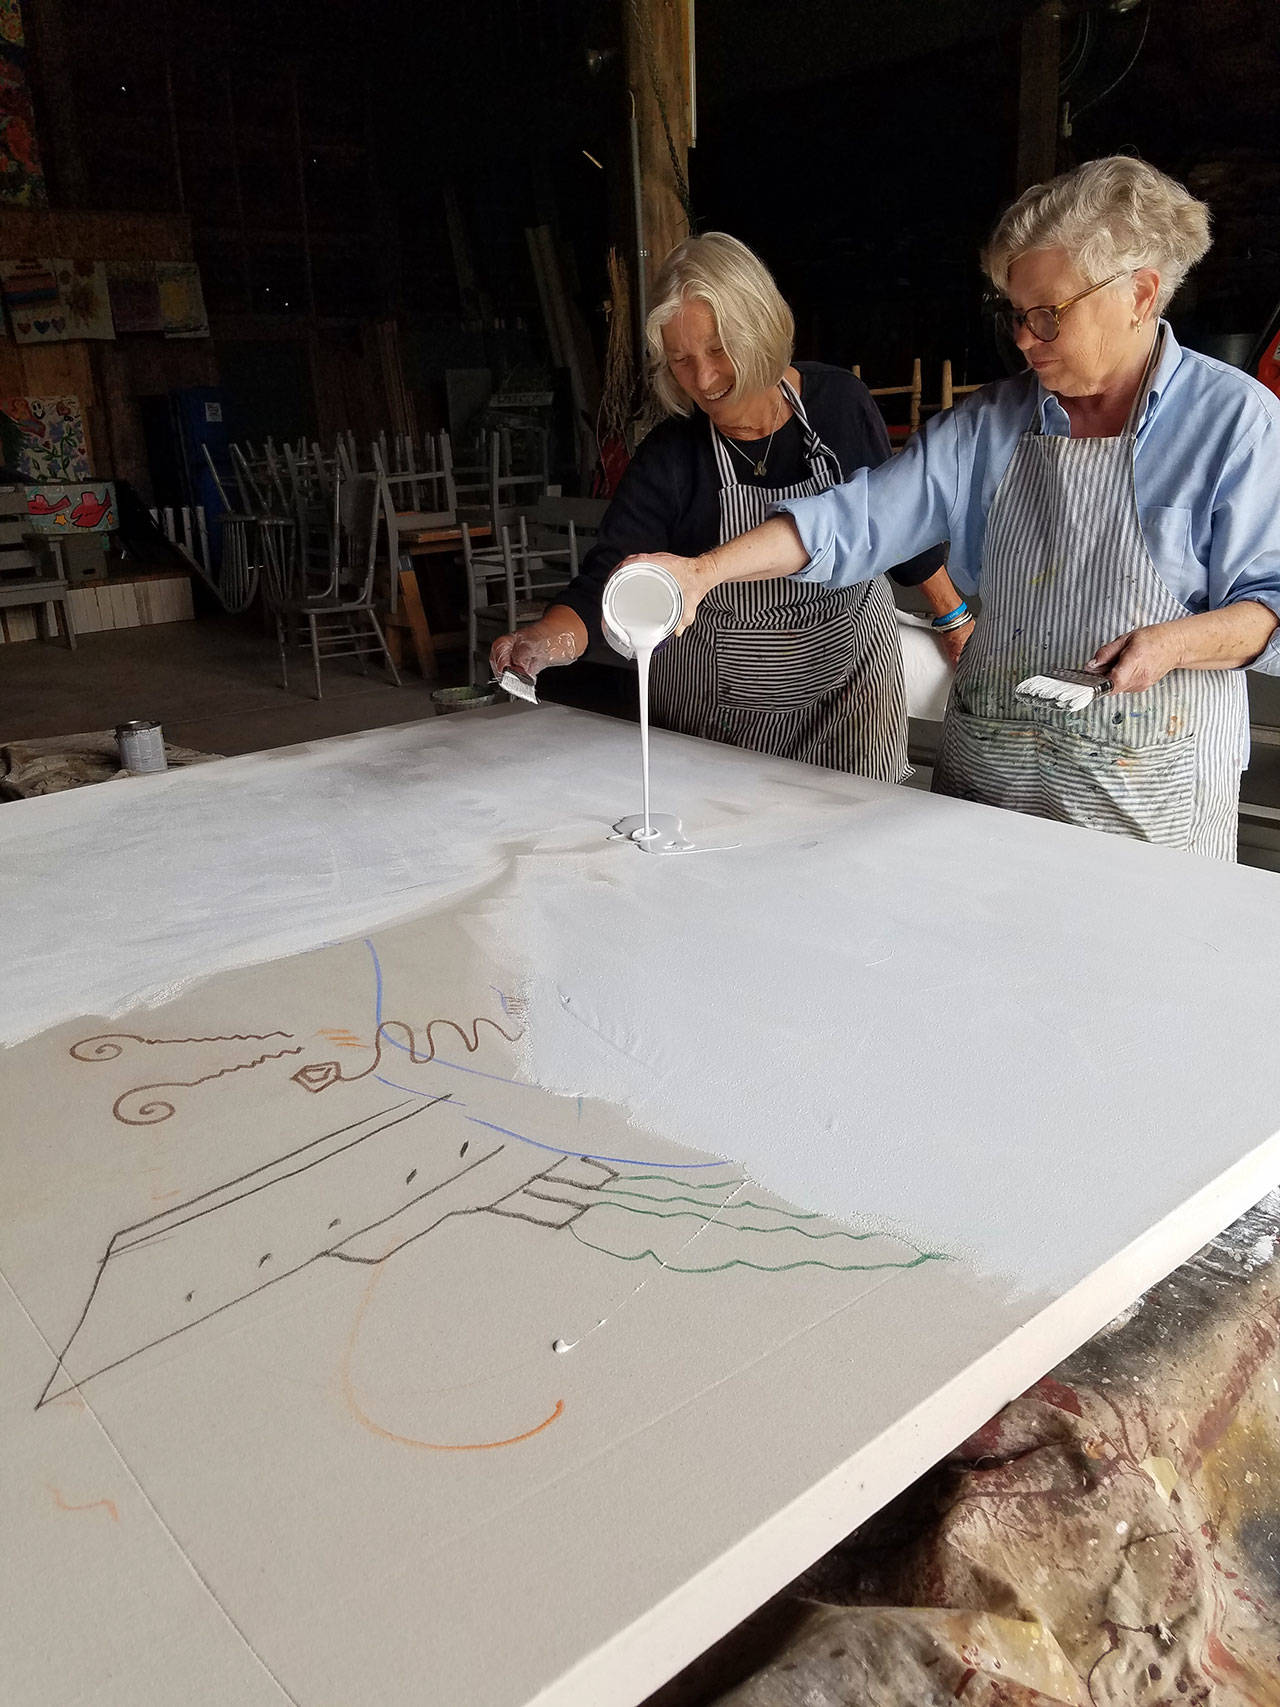 Sequim artists Lynne Armstrong, left, and Mary Franchini will collaborate on a piece of art during the 2021 ARTjam event, held in parallel with Sequim’s ARTfusion event on Sunday and Monday. Submitted photo